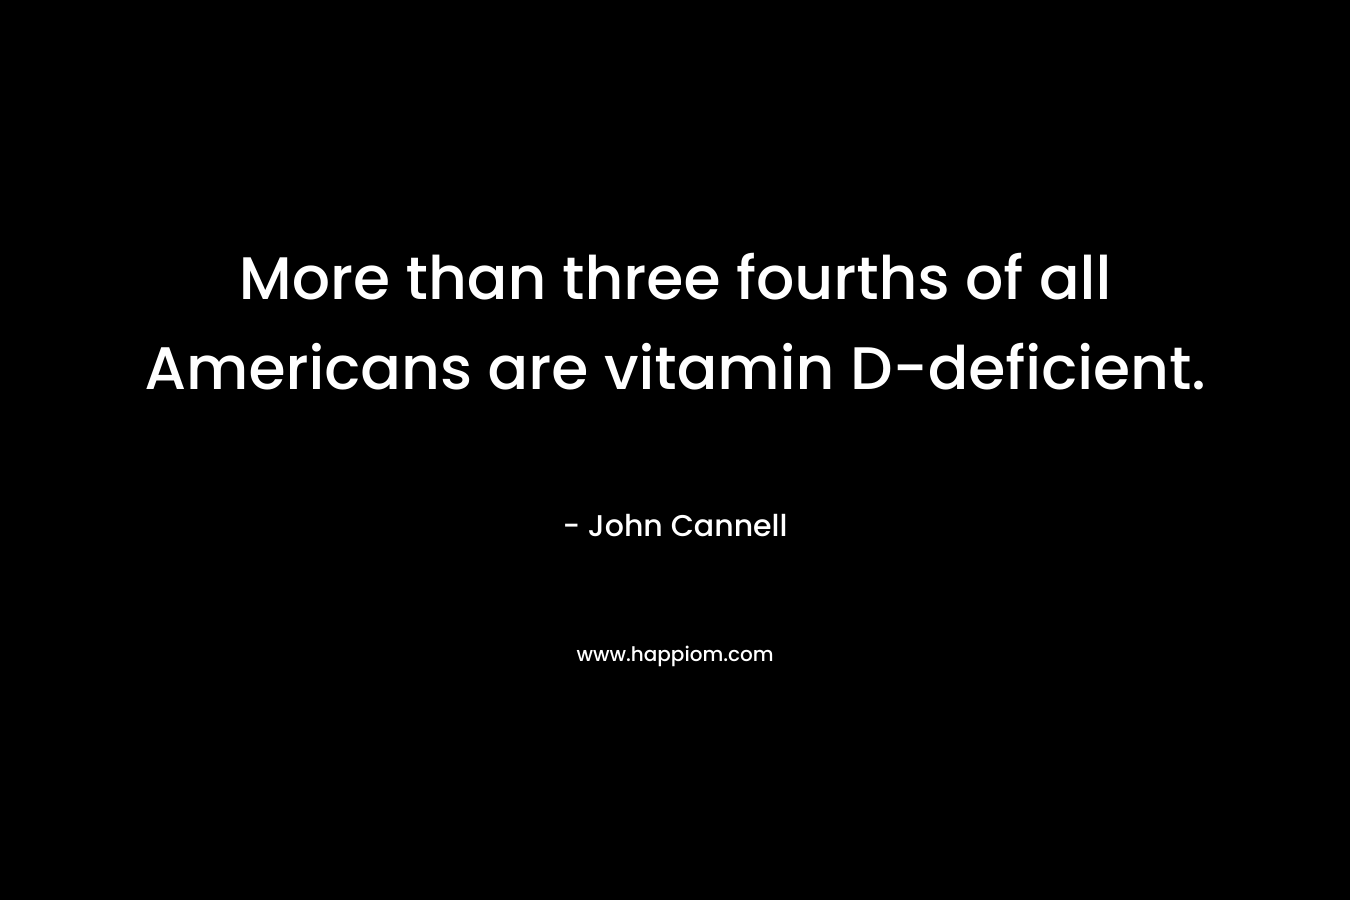 More than three fourths of all Americans are vitamin D-deficient. – John Cannell